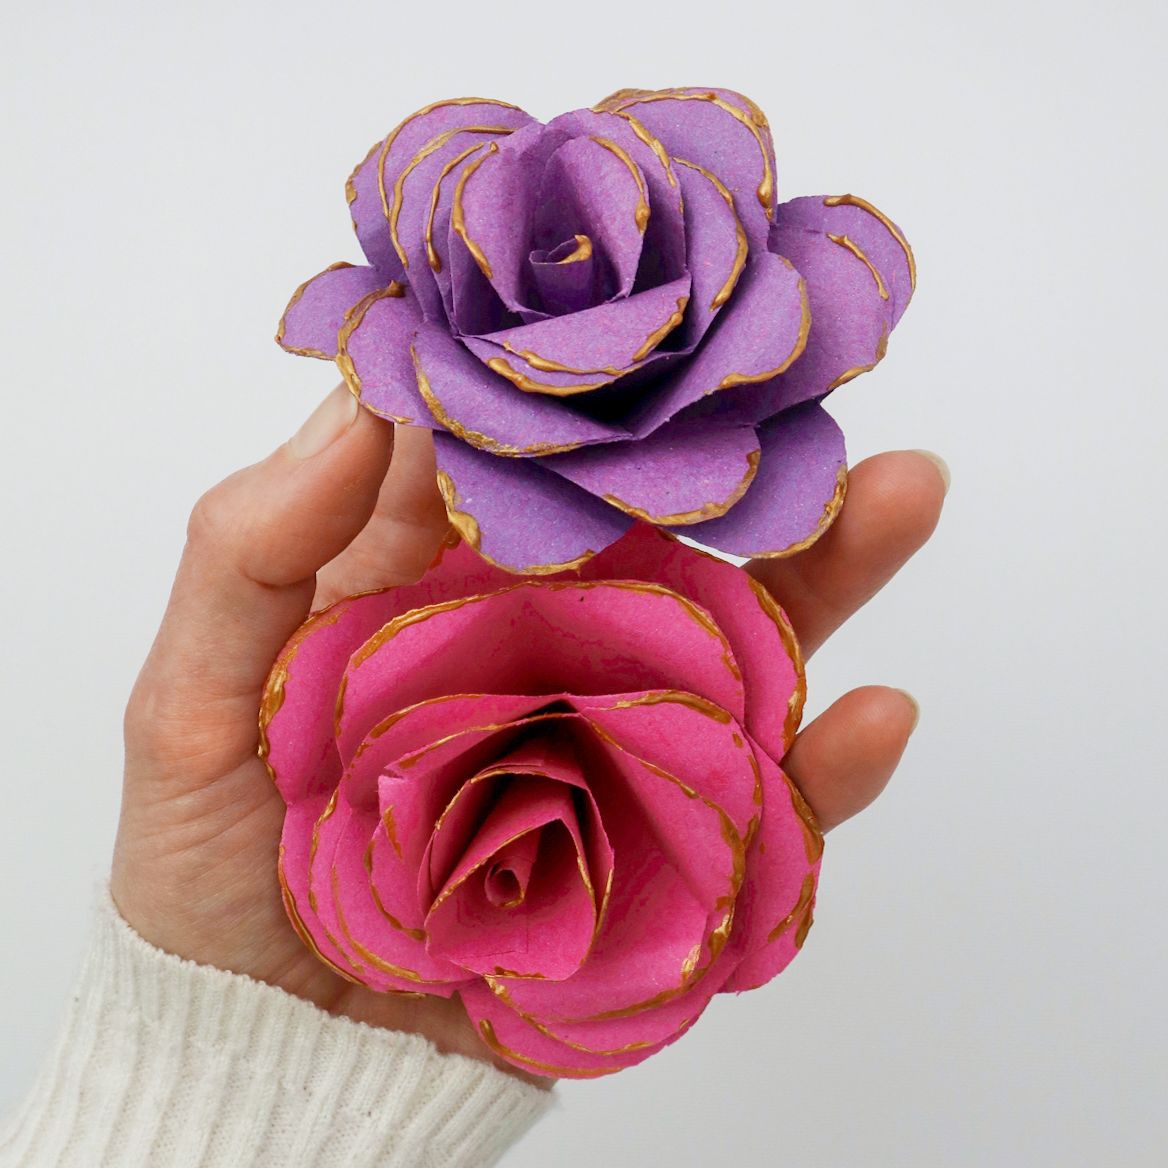 How To Make Paper Flowers Step By